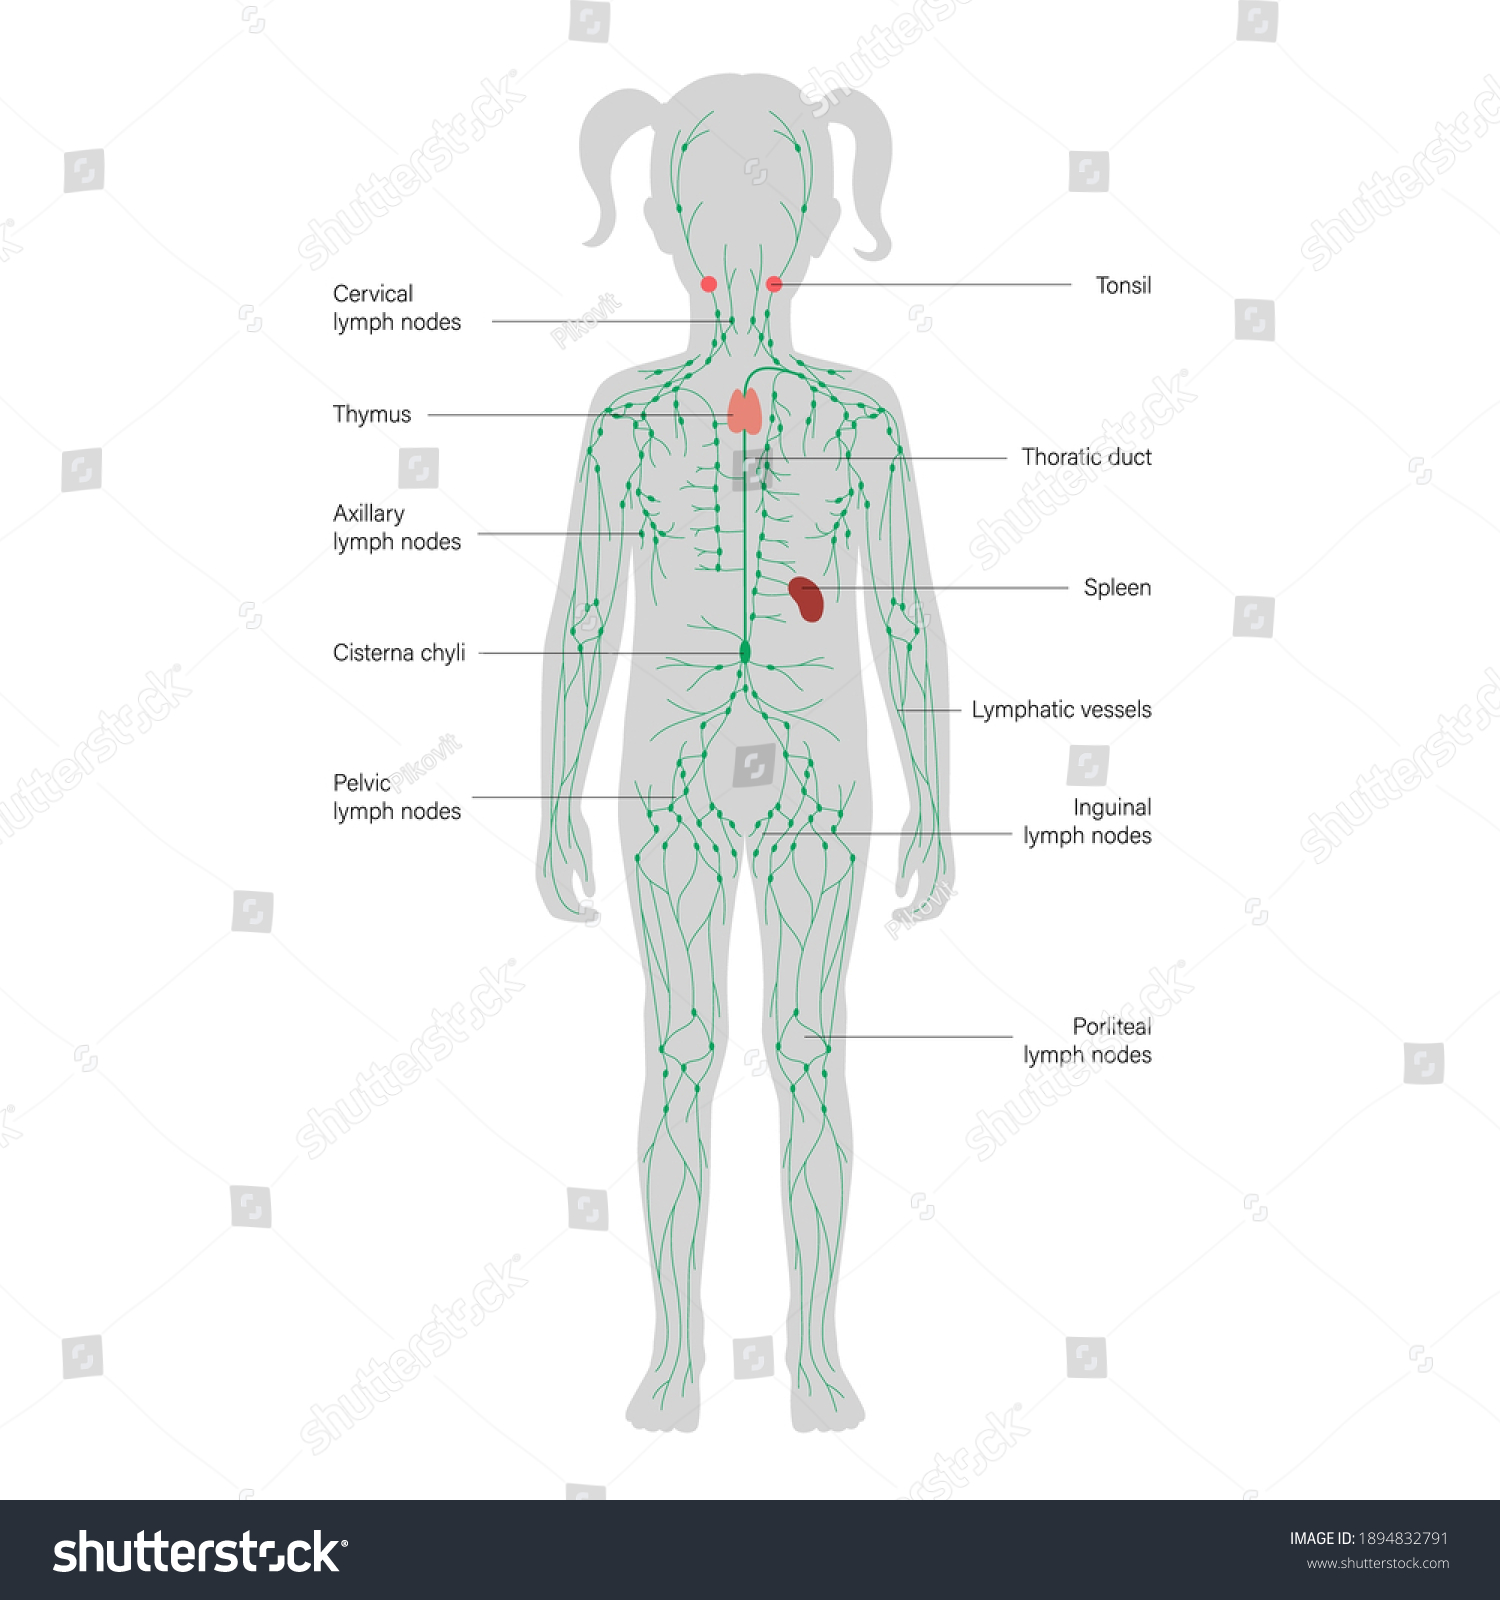 lymphatic system concept. Lymph nodes and ducts - Royalty Free Stock ...